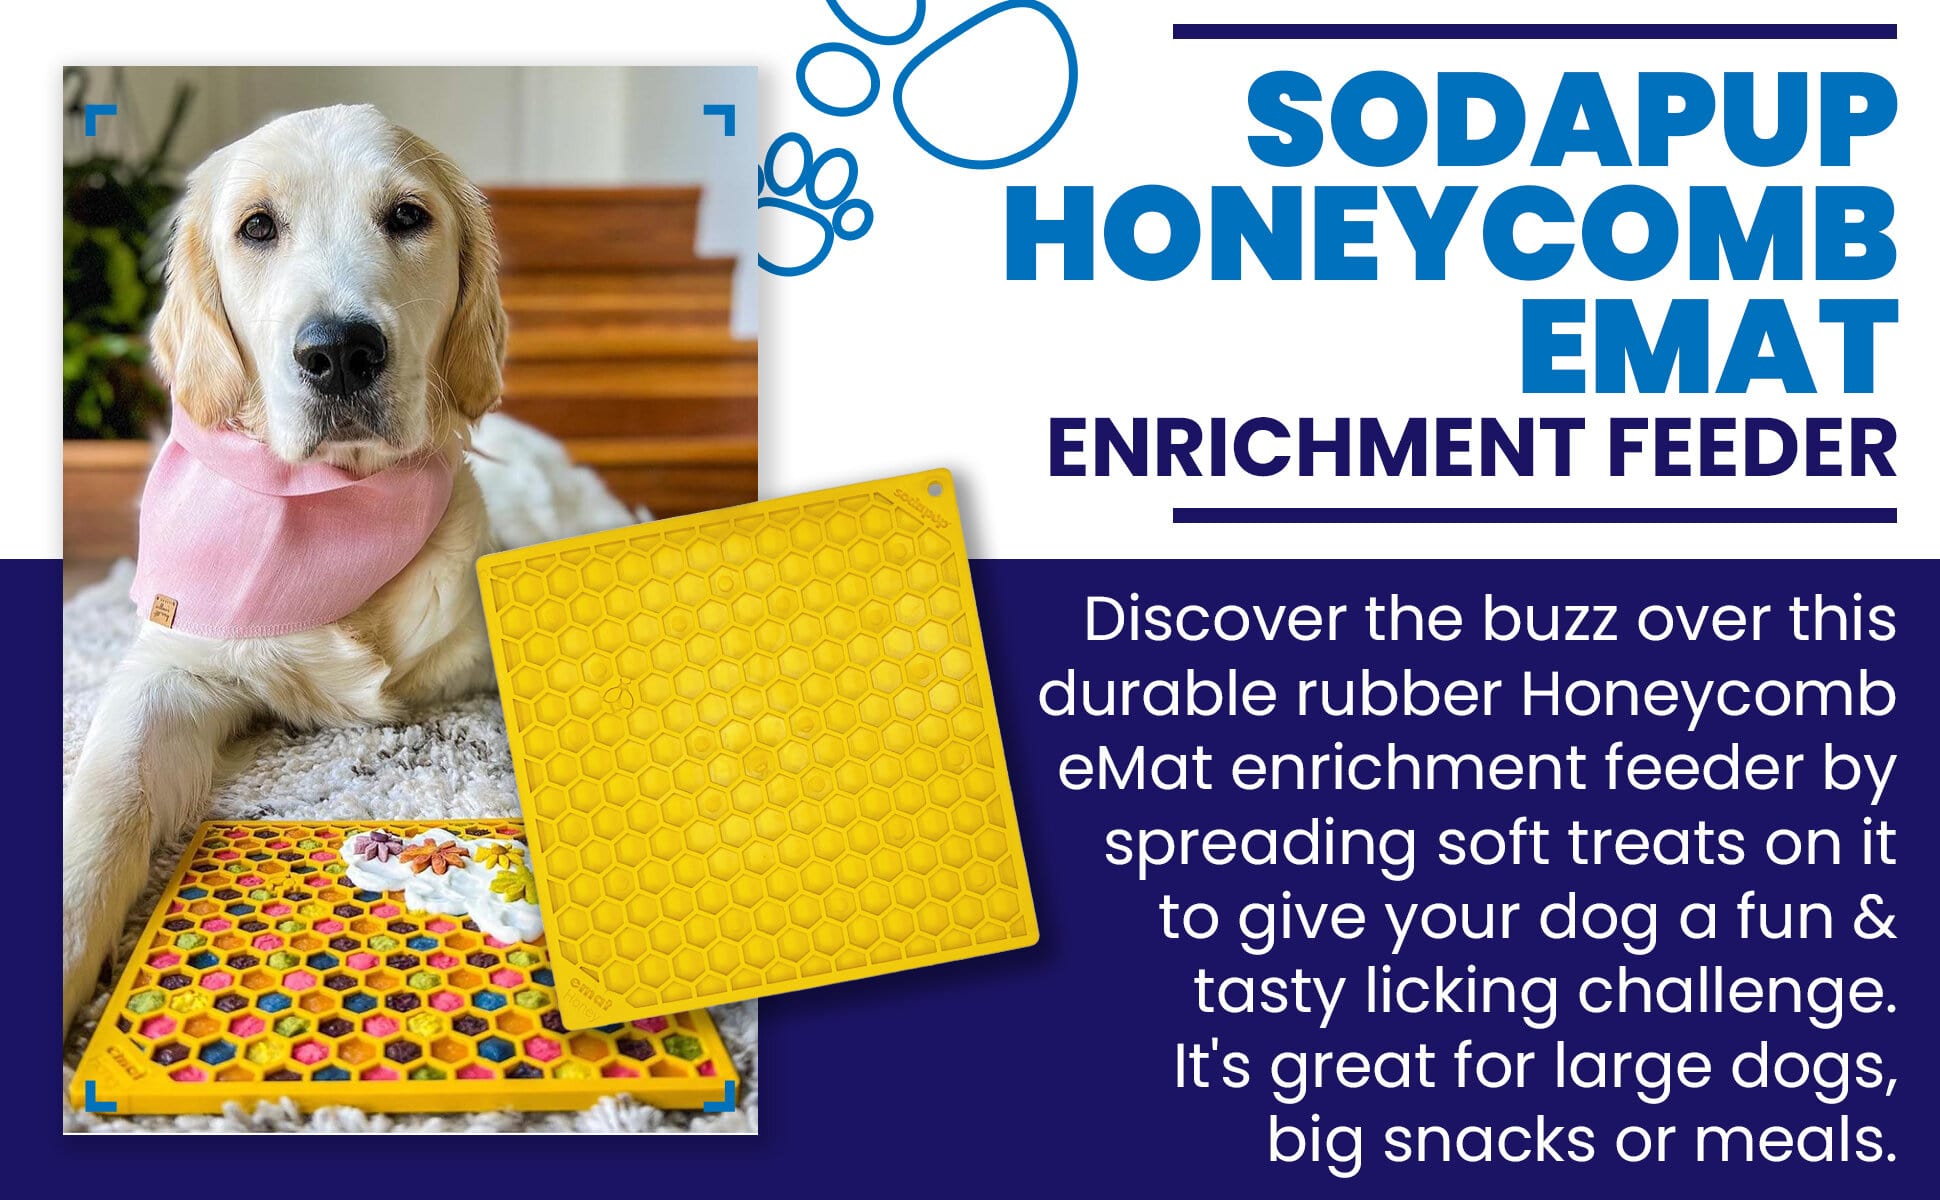 Meaty Bubbles: The Ultimate Pet Enrichment Tool for Happy and Healthy